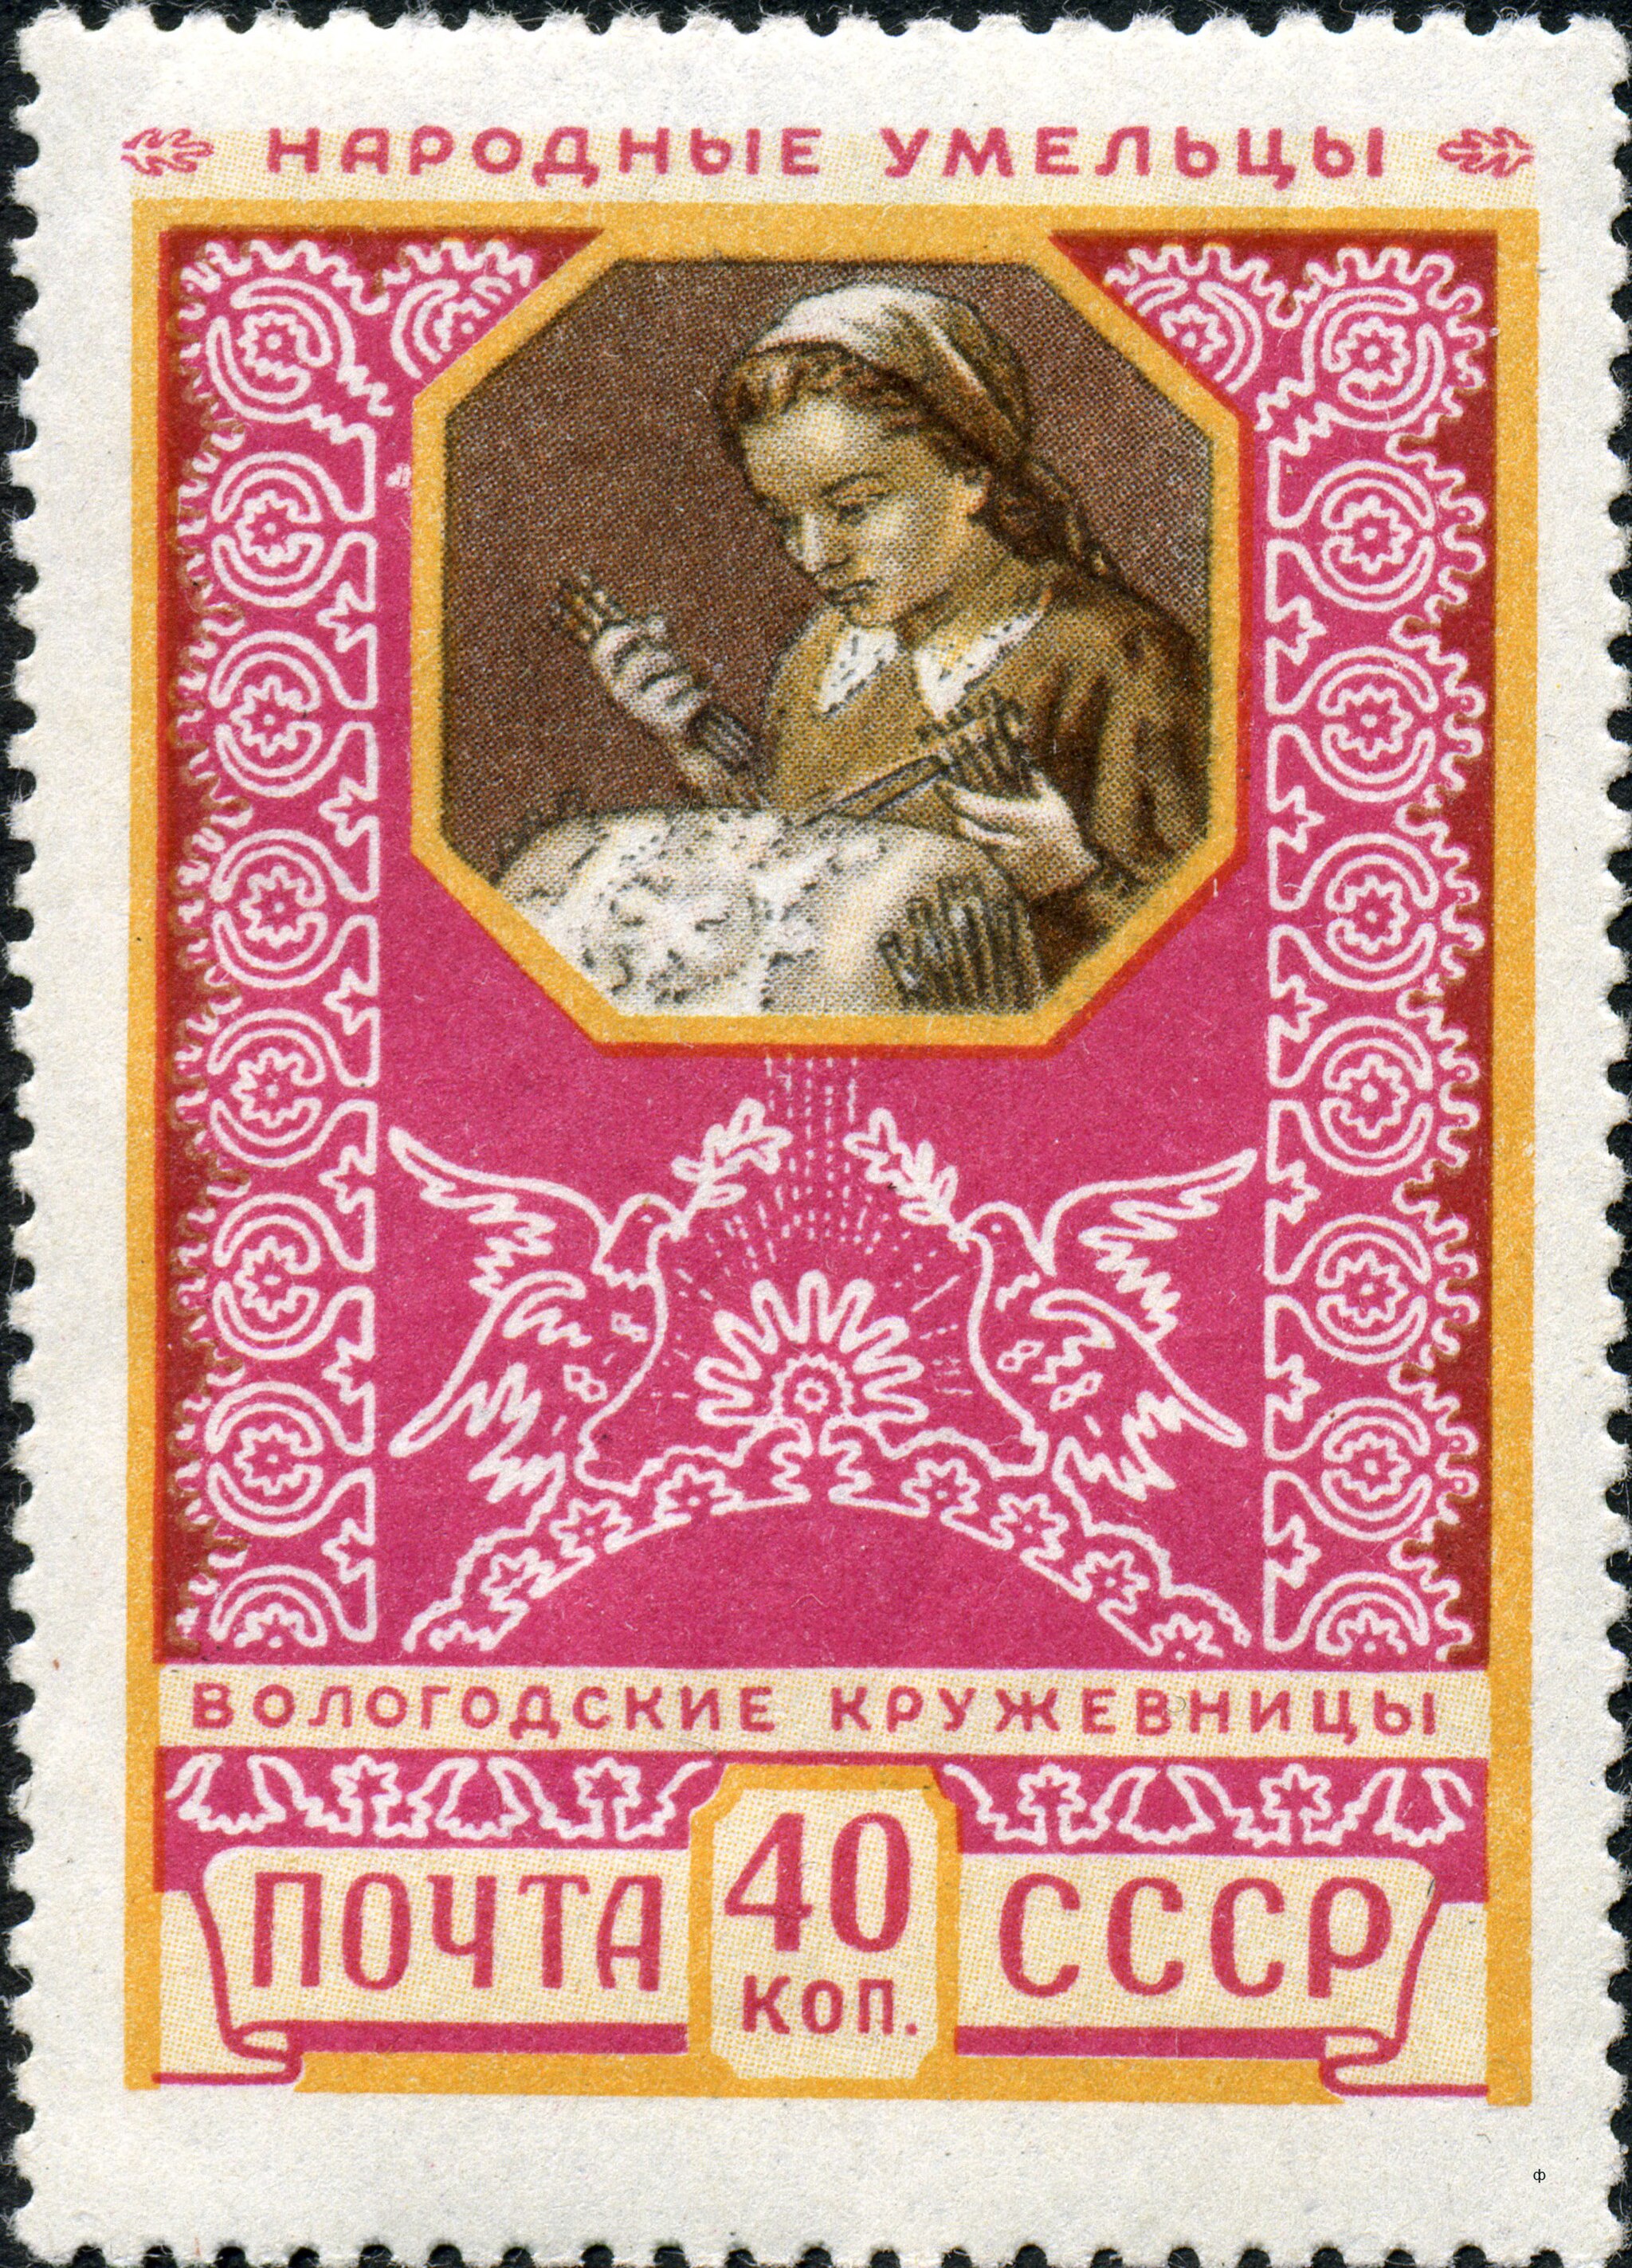 The Soviet Union 1957 CPA 1994 stamp (Vologda Lace Making).jpg